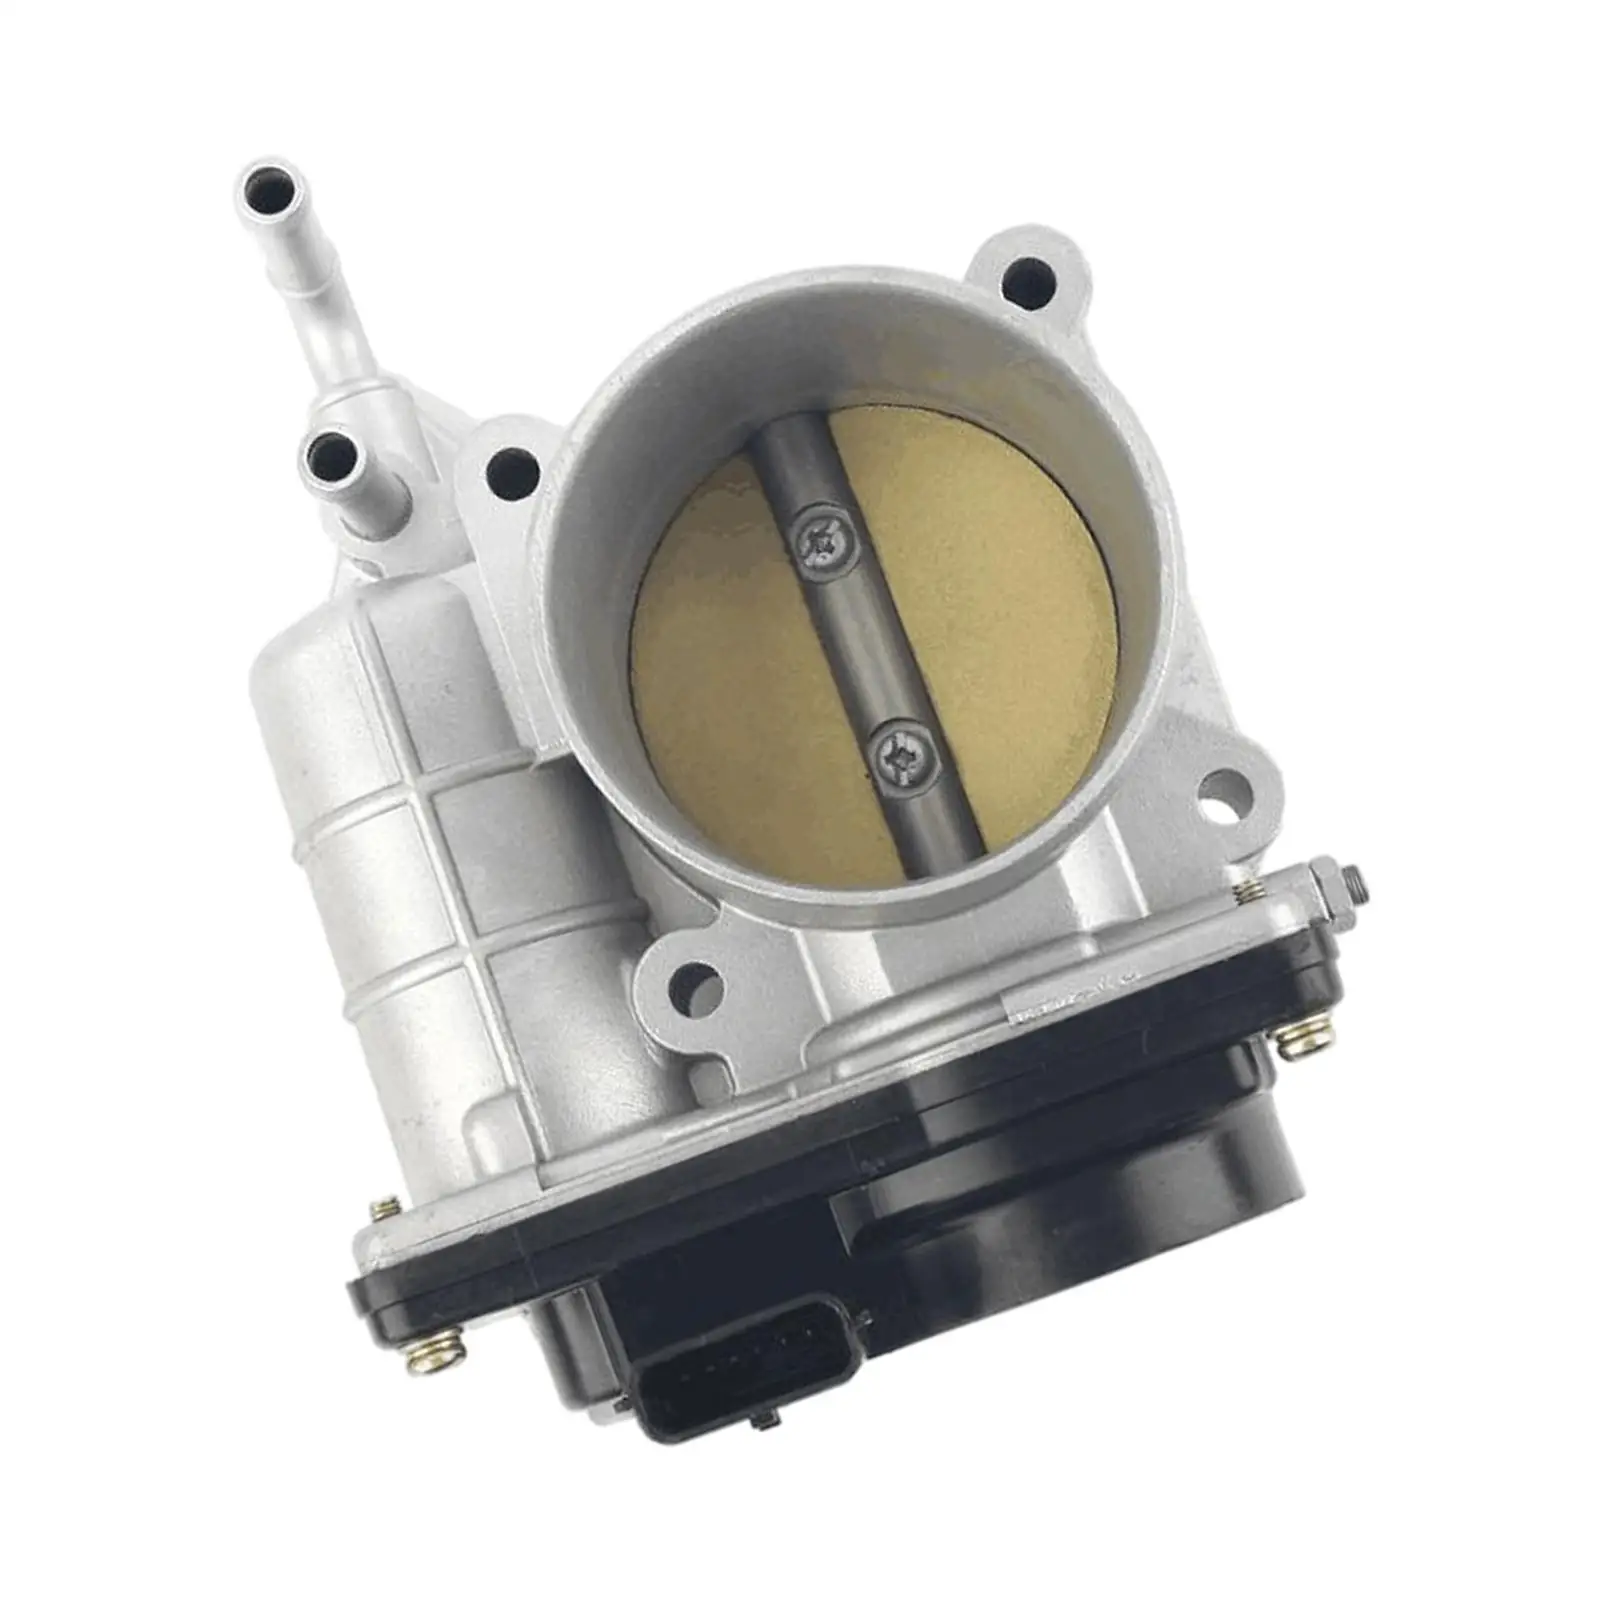 Throttle Body Assembly Etb0004 Repalcement Parts Accessories Compatible Replaces Fit for 2007-2013 4 cyl 2.5L